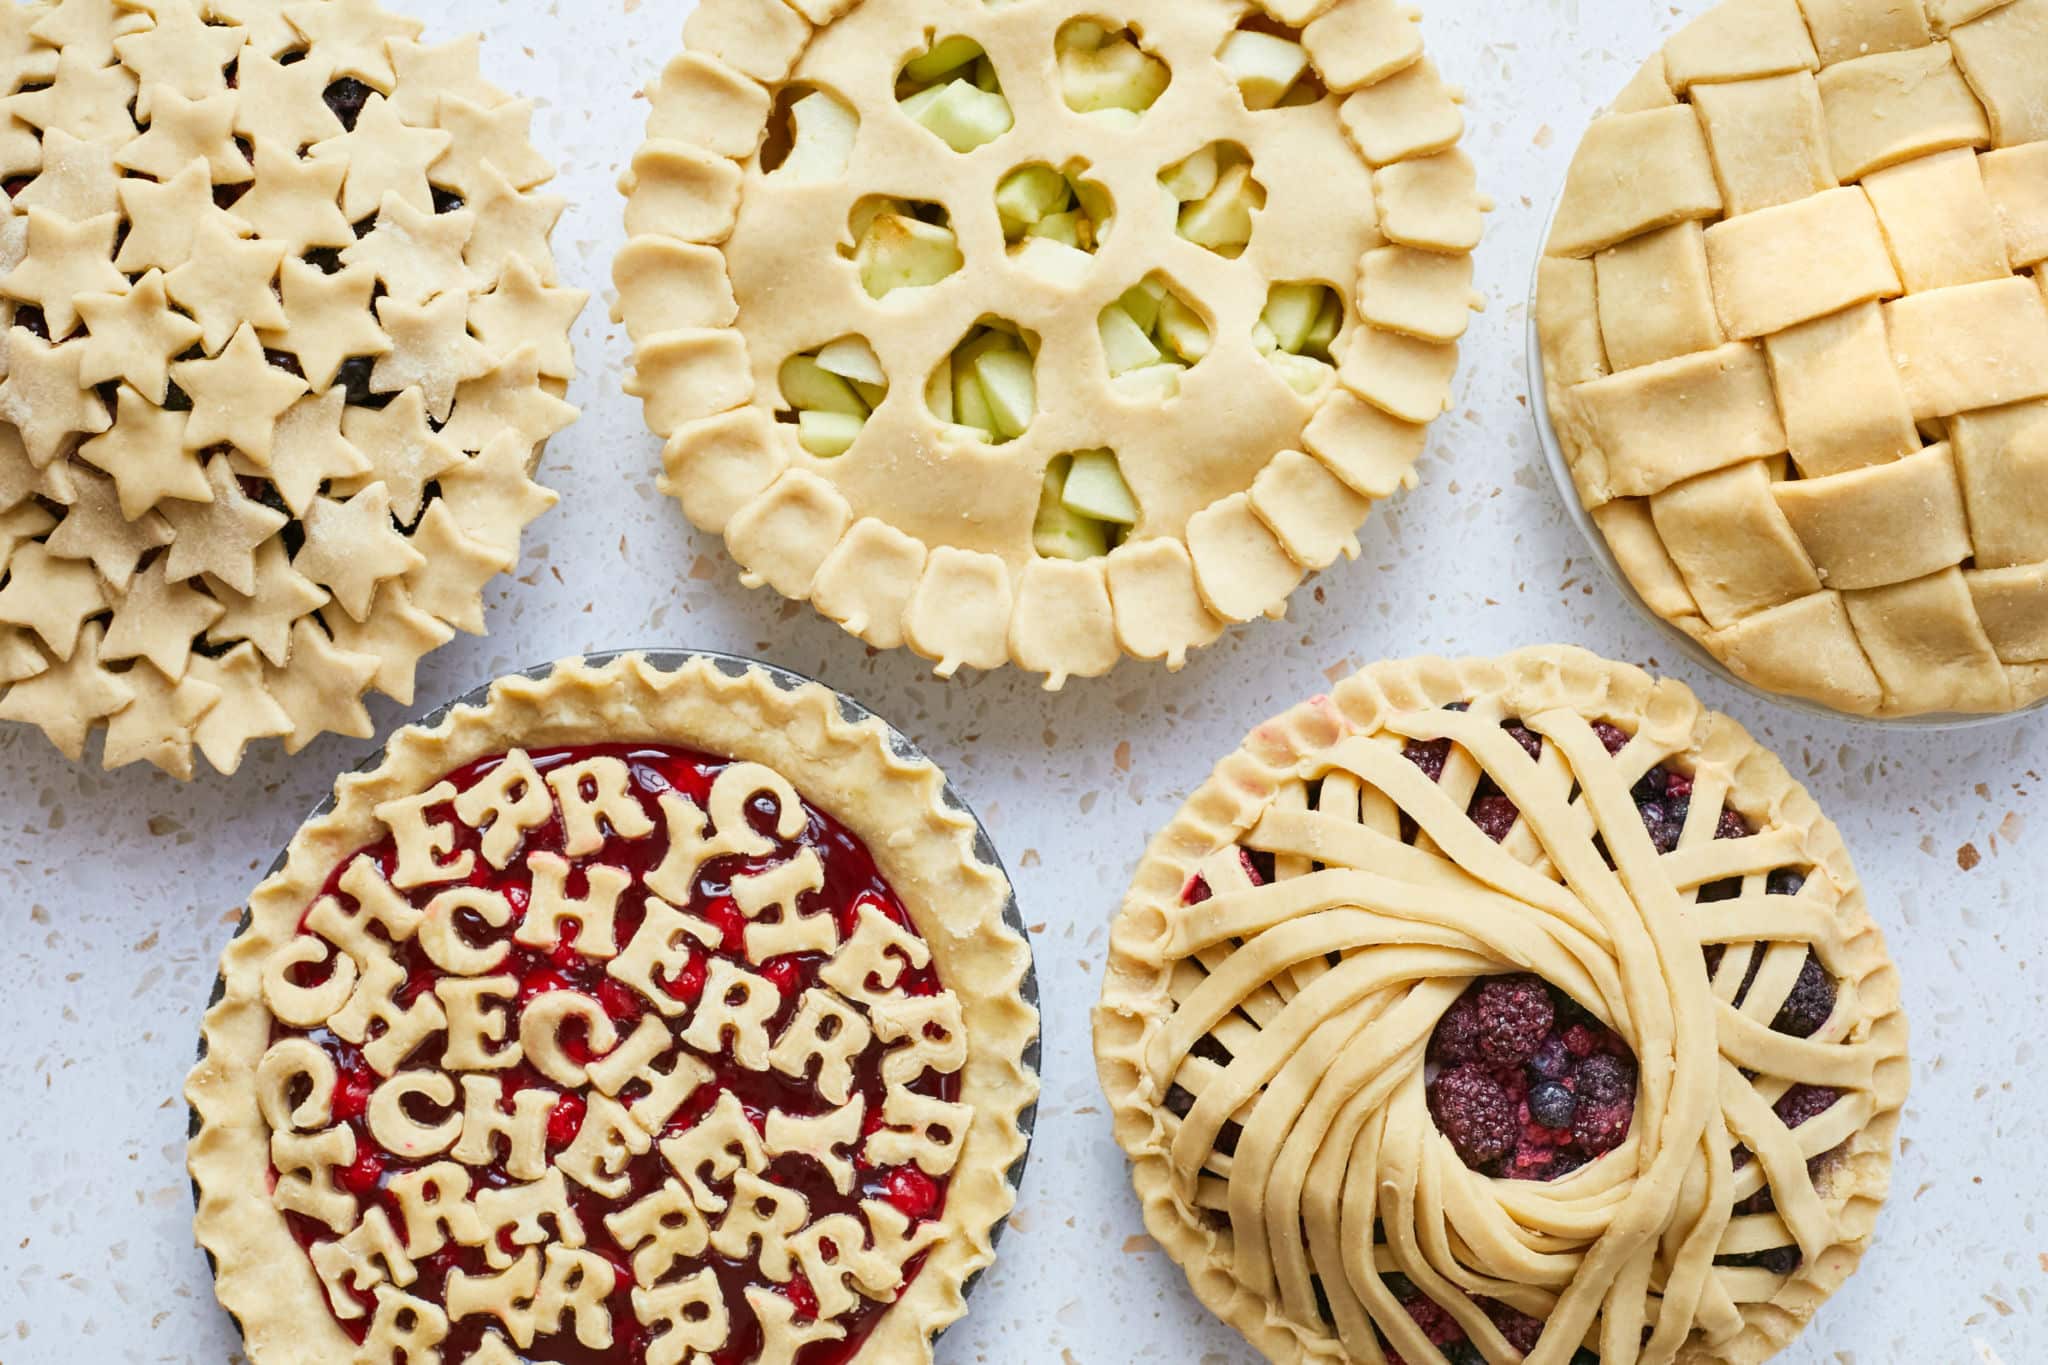 Baking Guides: How to Make Mini Pies